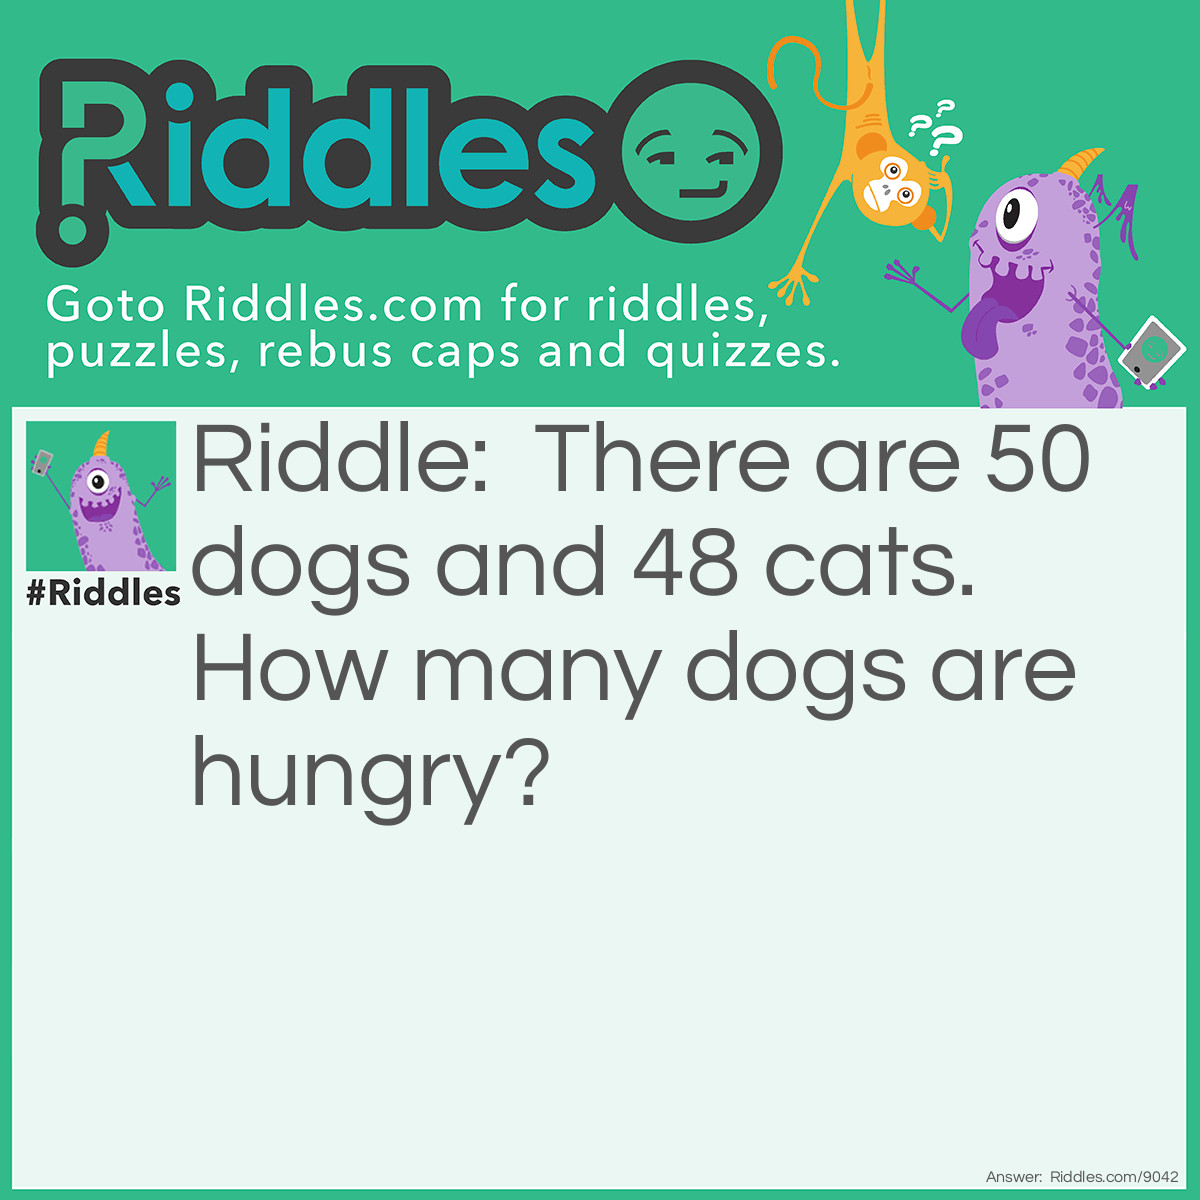 Riddle: There are 50 dogs and 48 cats. How many dogs are hungry? Answer: 10, because 40 ATE cats.